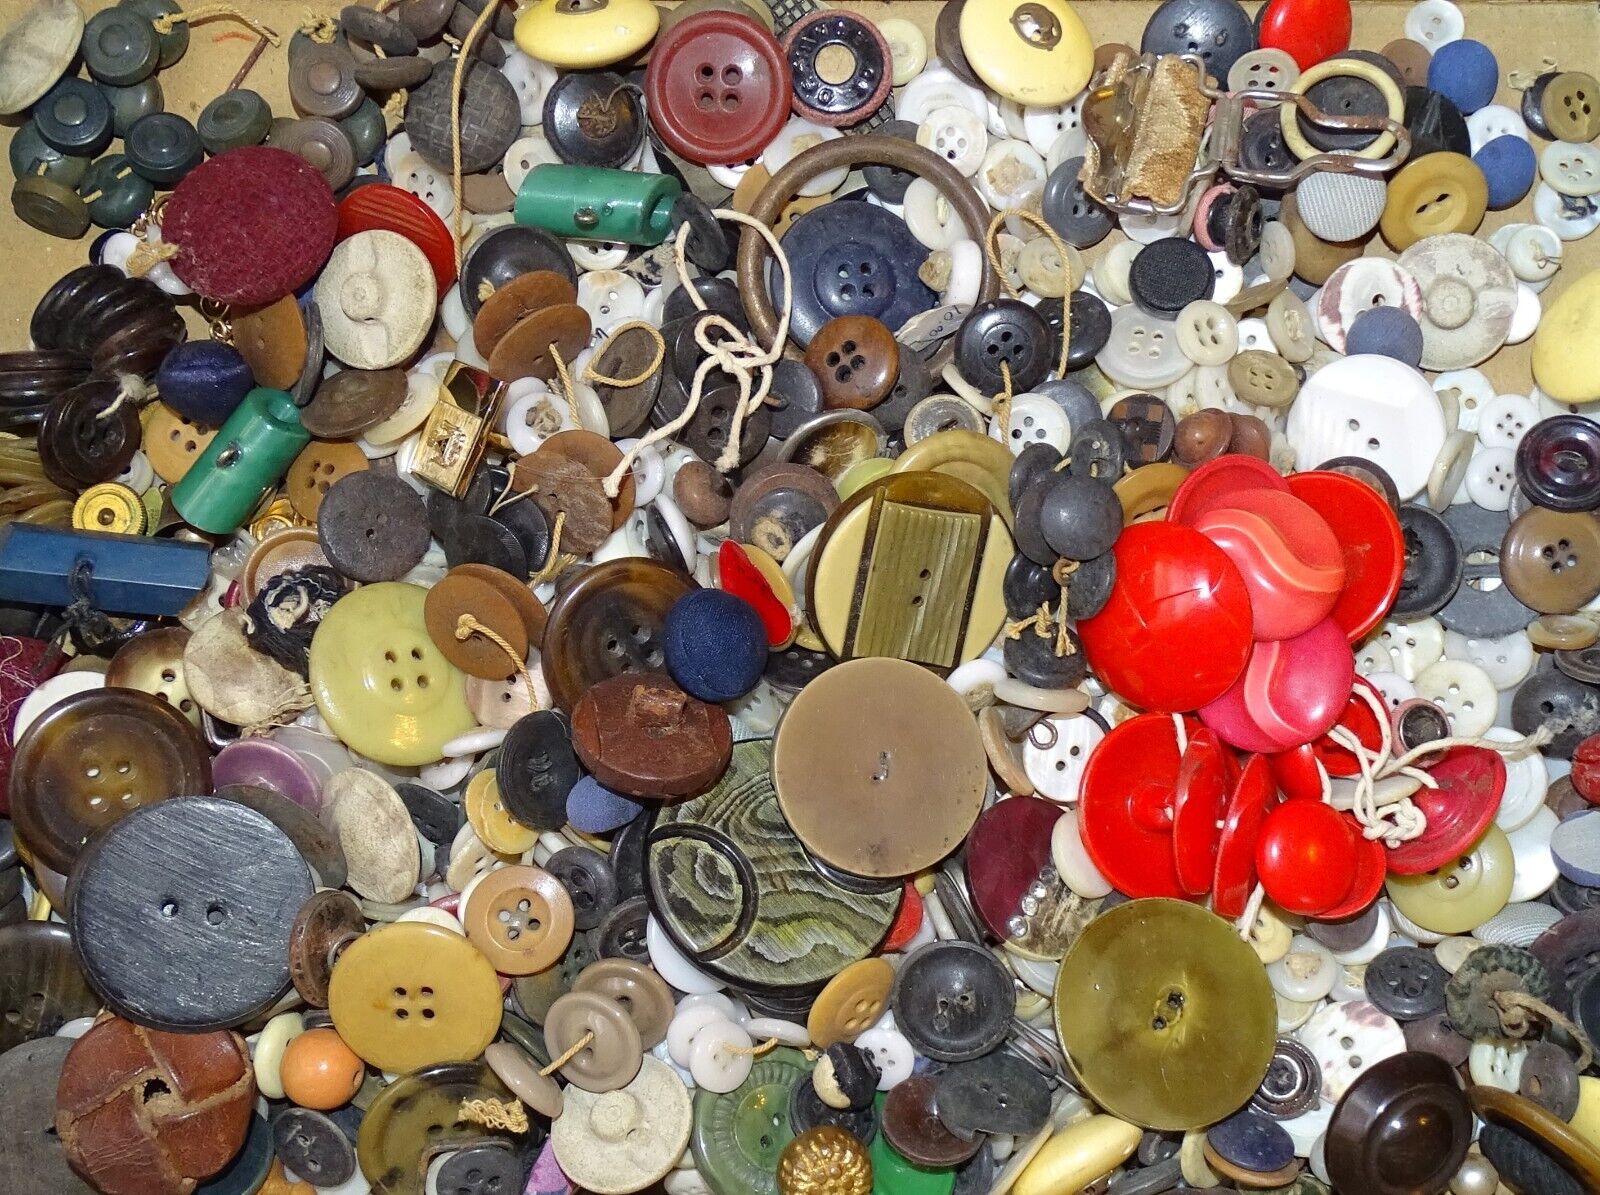 Small Lot of old Clothing Buttons and what-nots From an Estate Sale